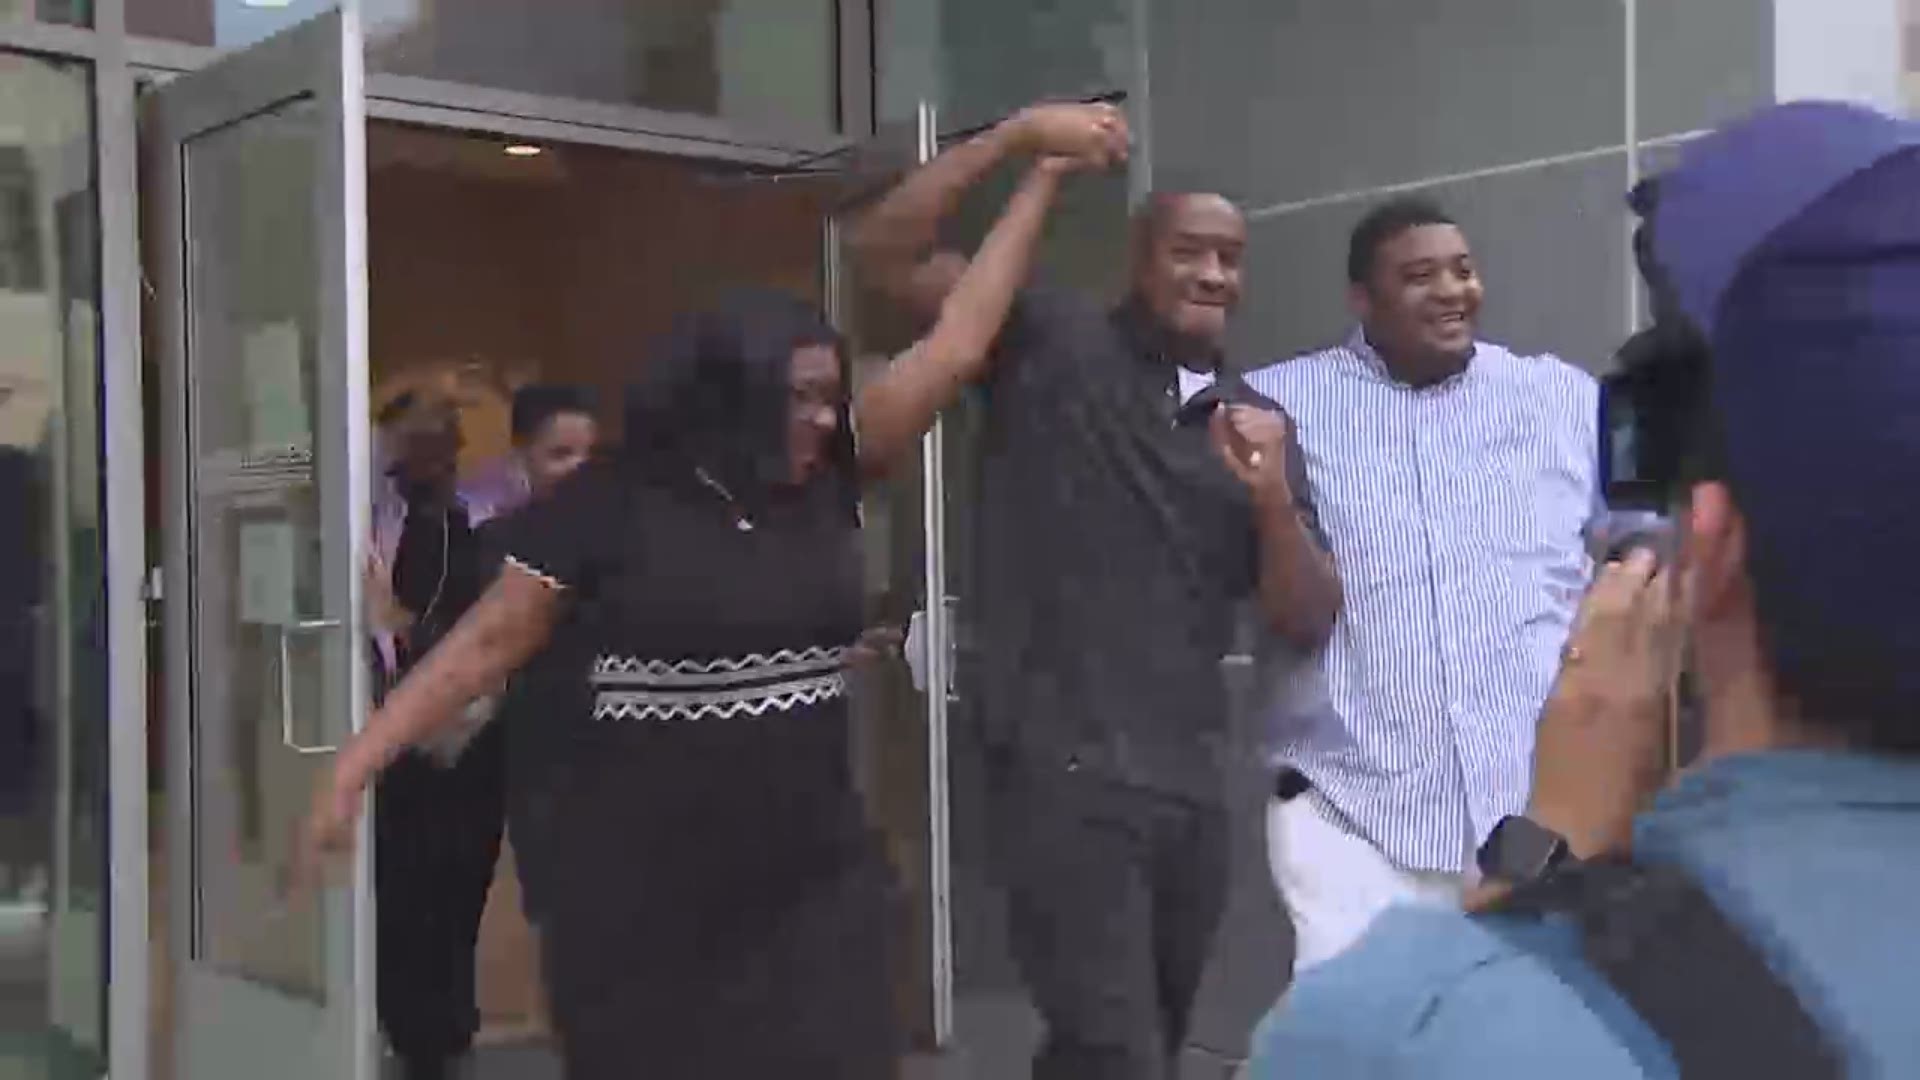 Lydell Grant speaks after being released from jail after serving 10 years of murder sentence